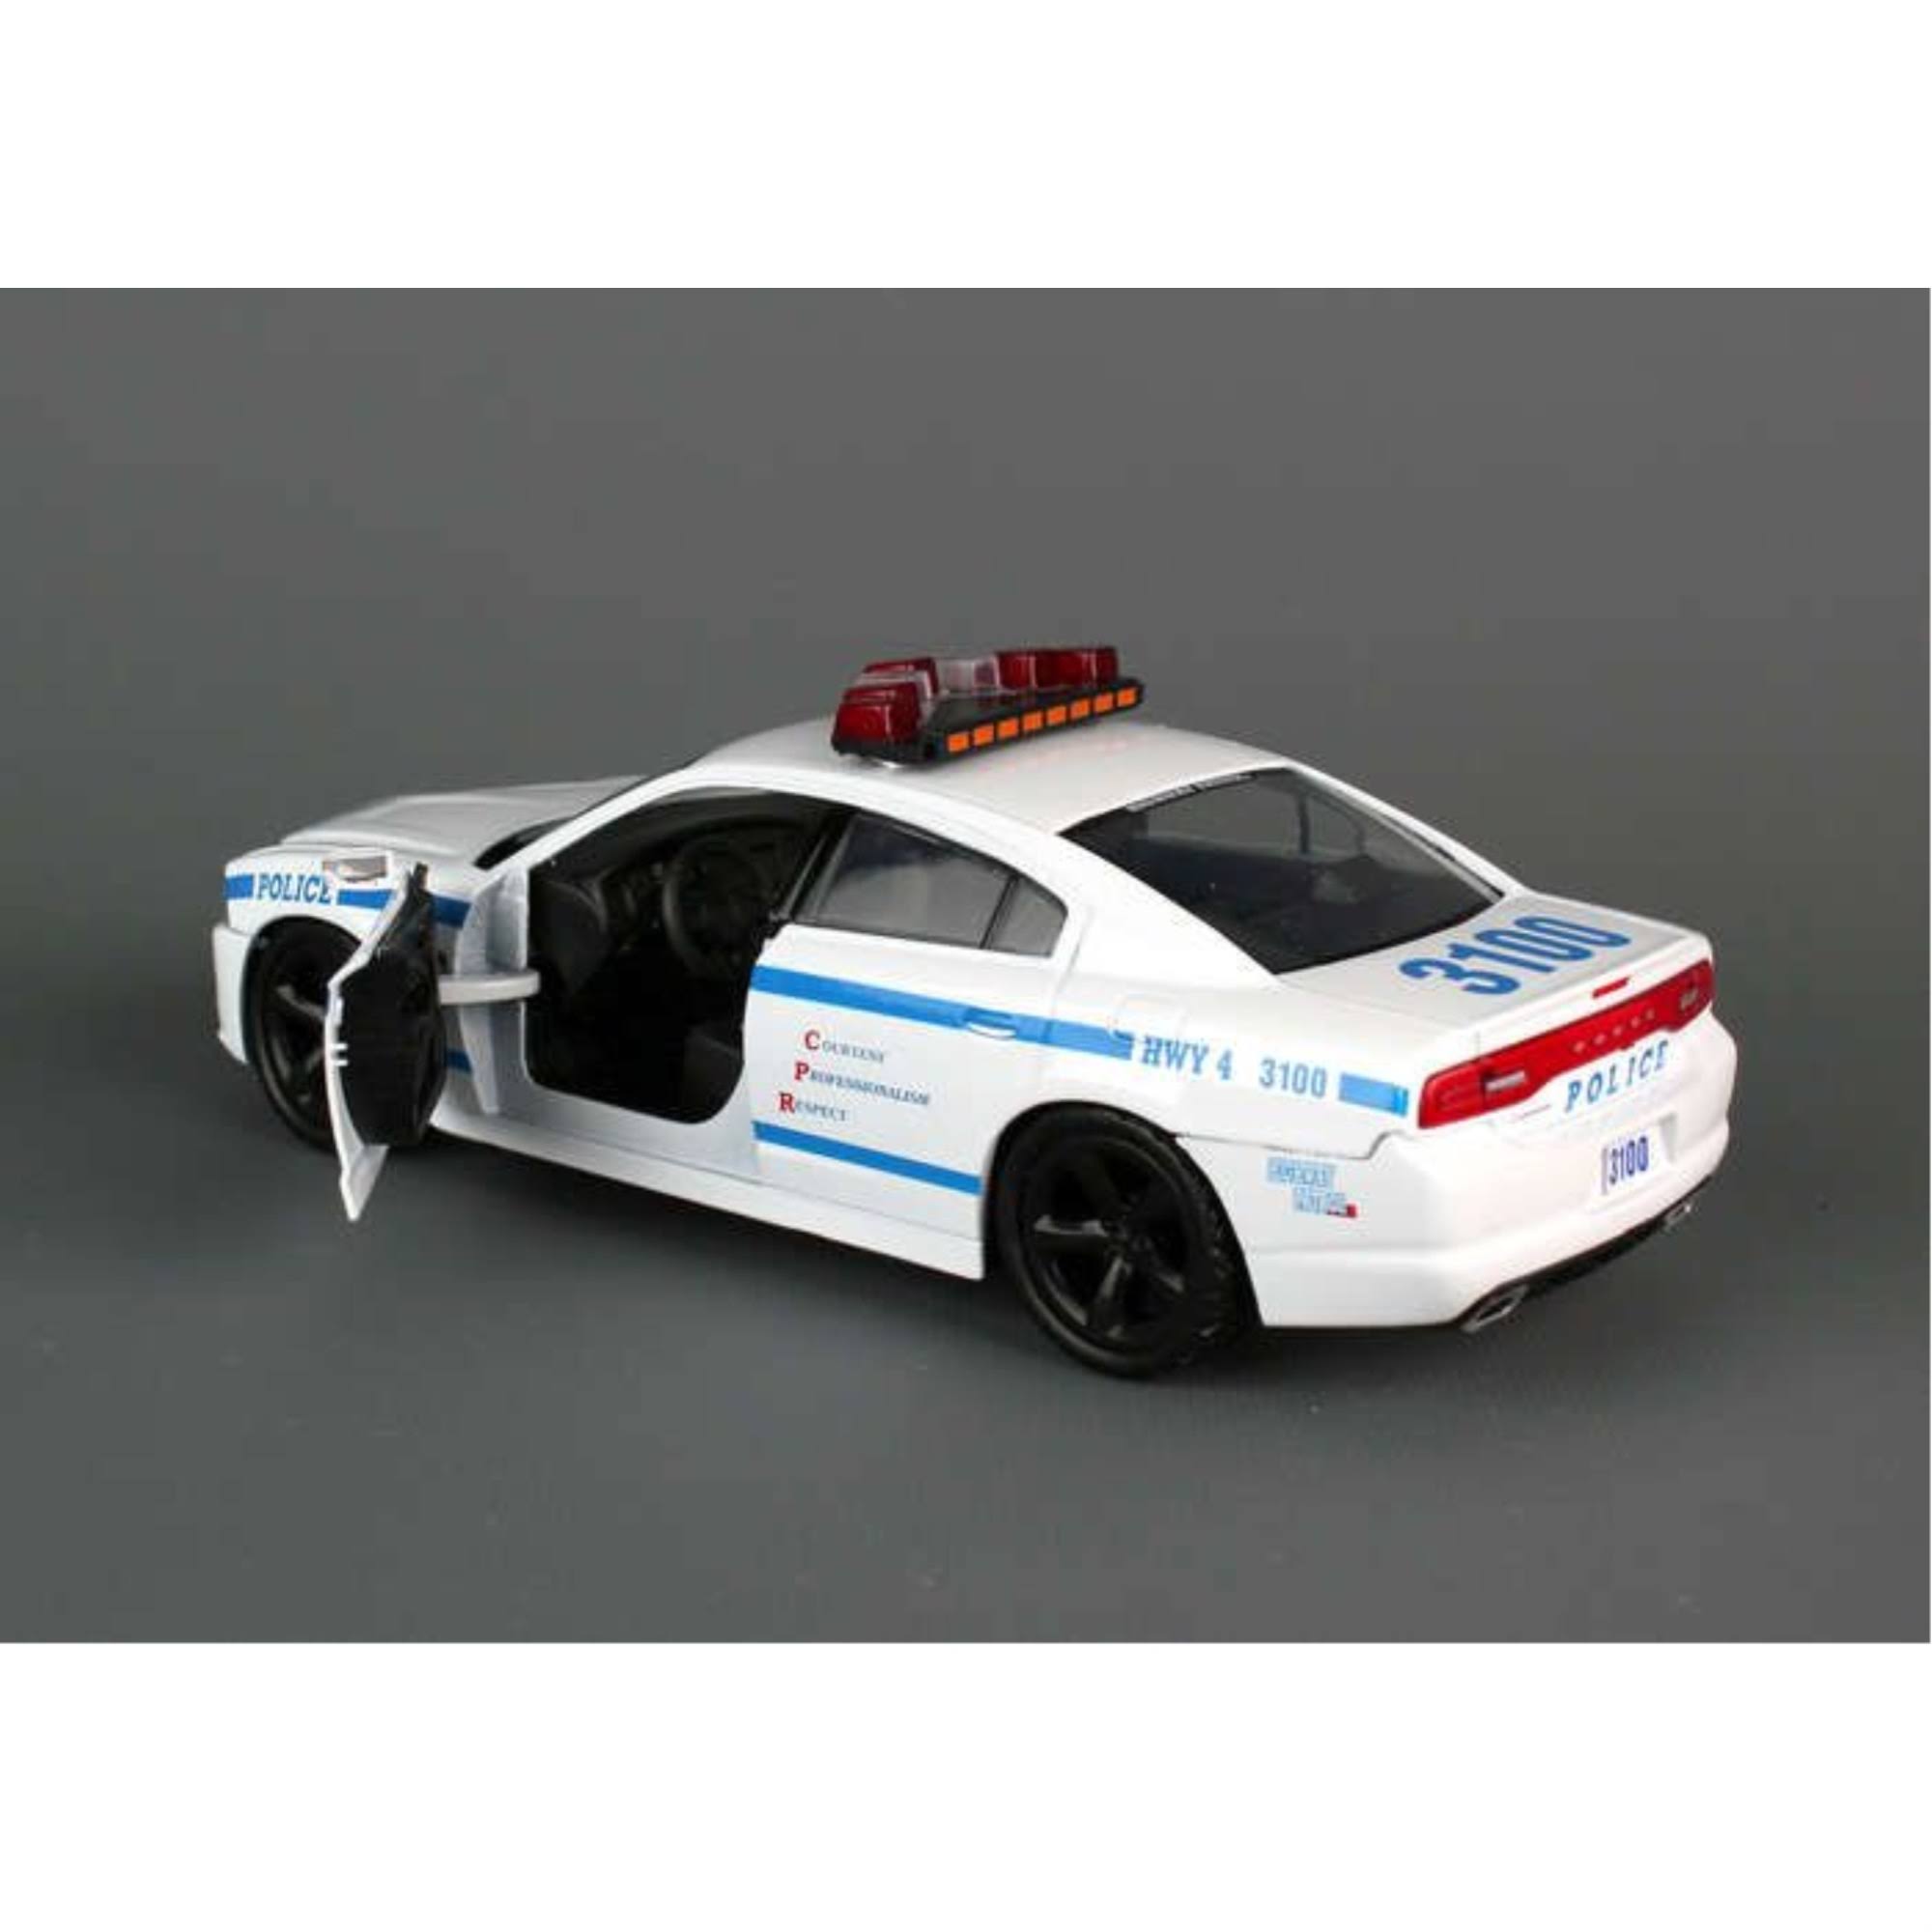 New York City Die-Cast NY71693 1-24 Nypd Dodge Charger